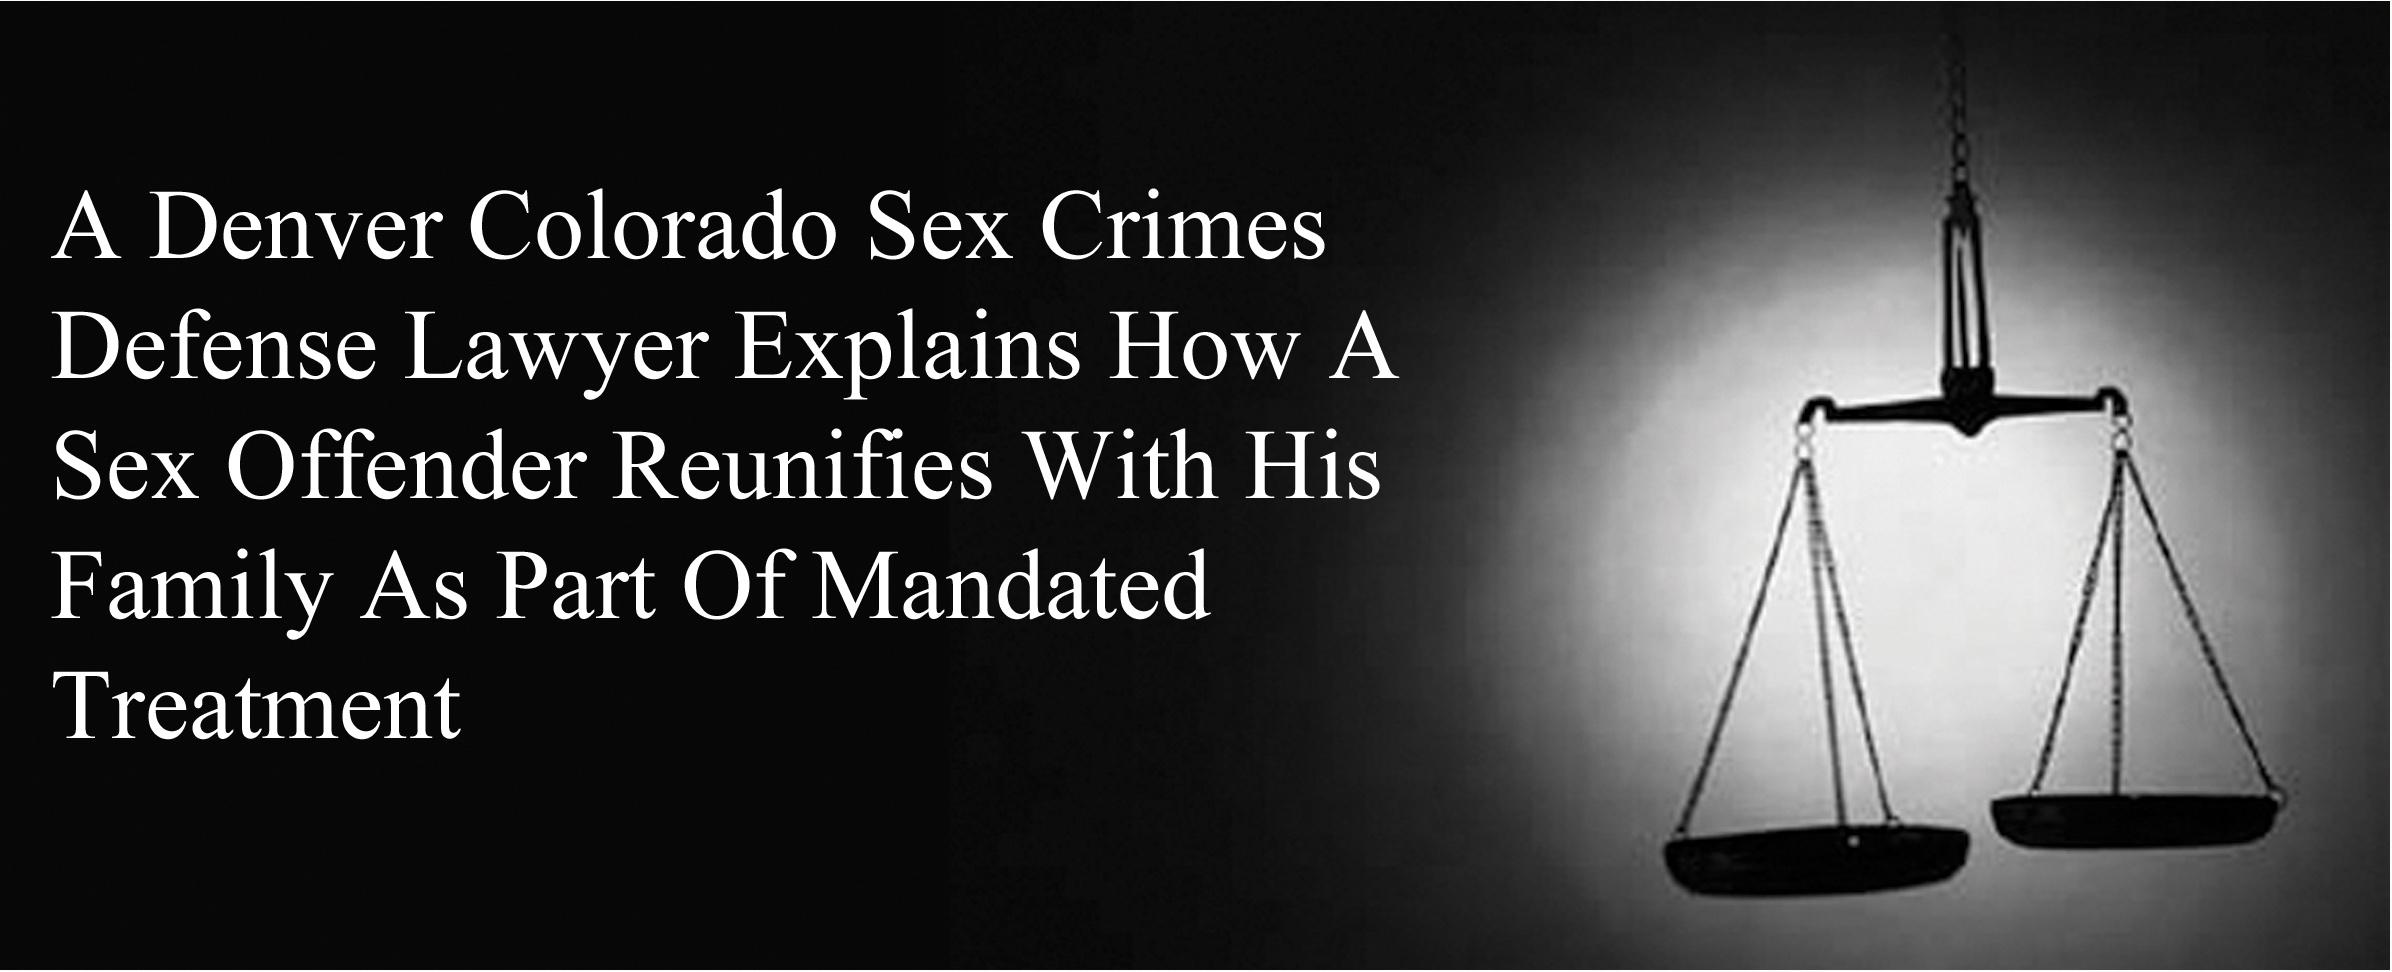 A Denver Colorado Sex Crimes Defense Lawyer Explains How A Sex Offender  Reunifies With His Family As Part Of Mandated Treatment Colorado Sex Crimes  Lawyer - Criminal Attorney Specializing in Sex Crimes